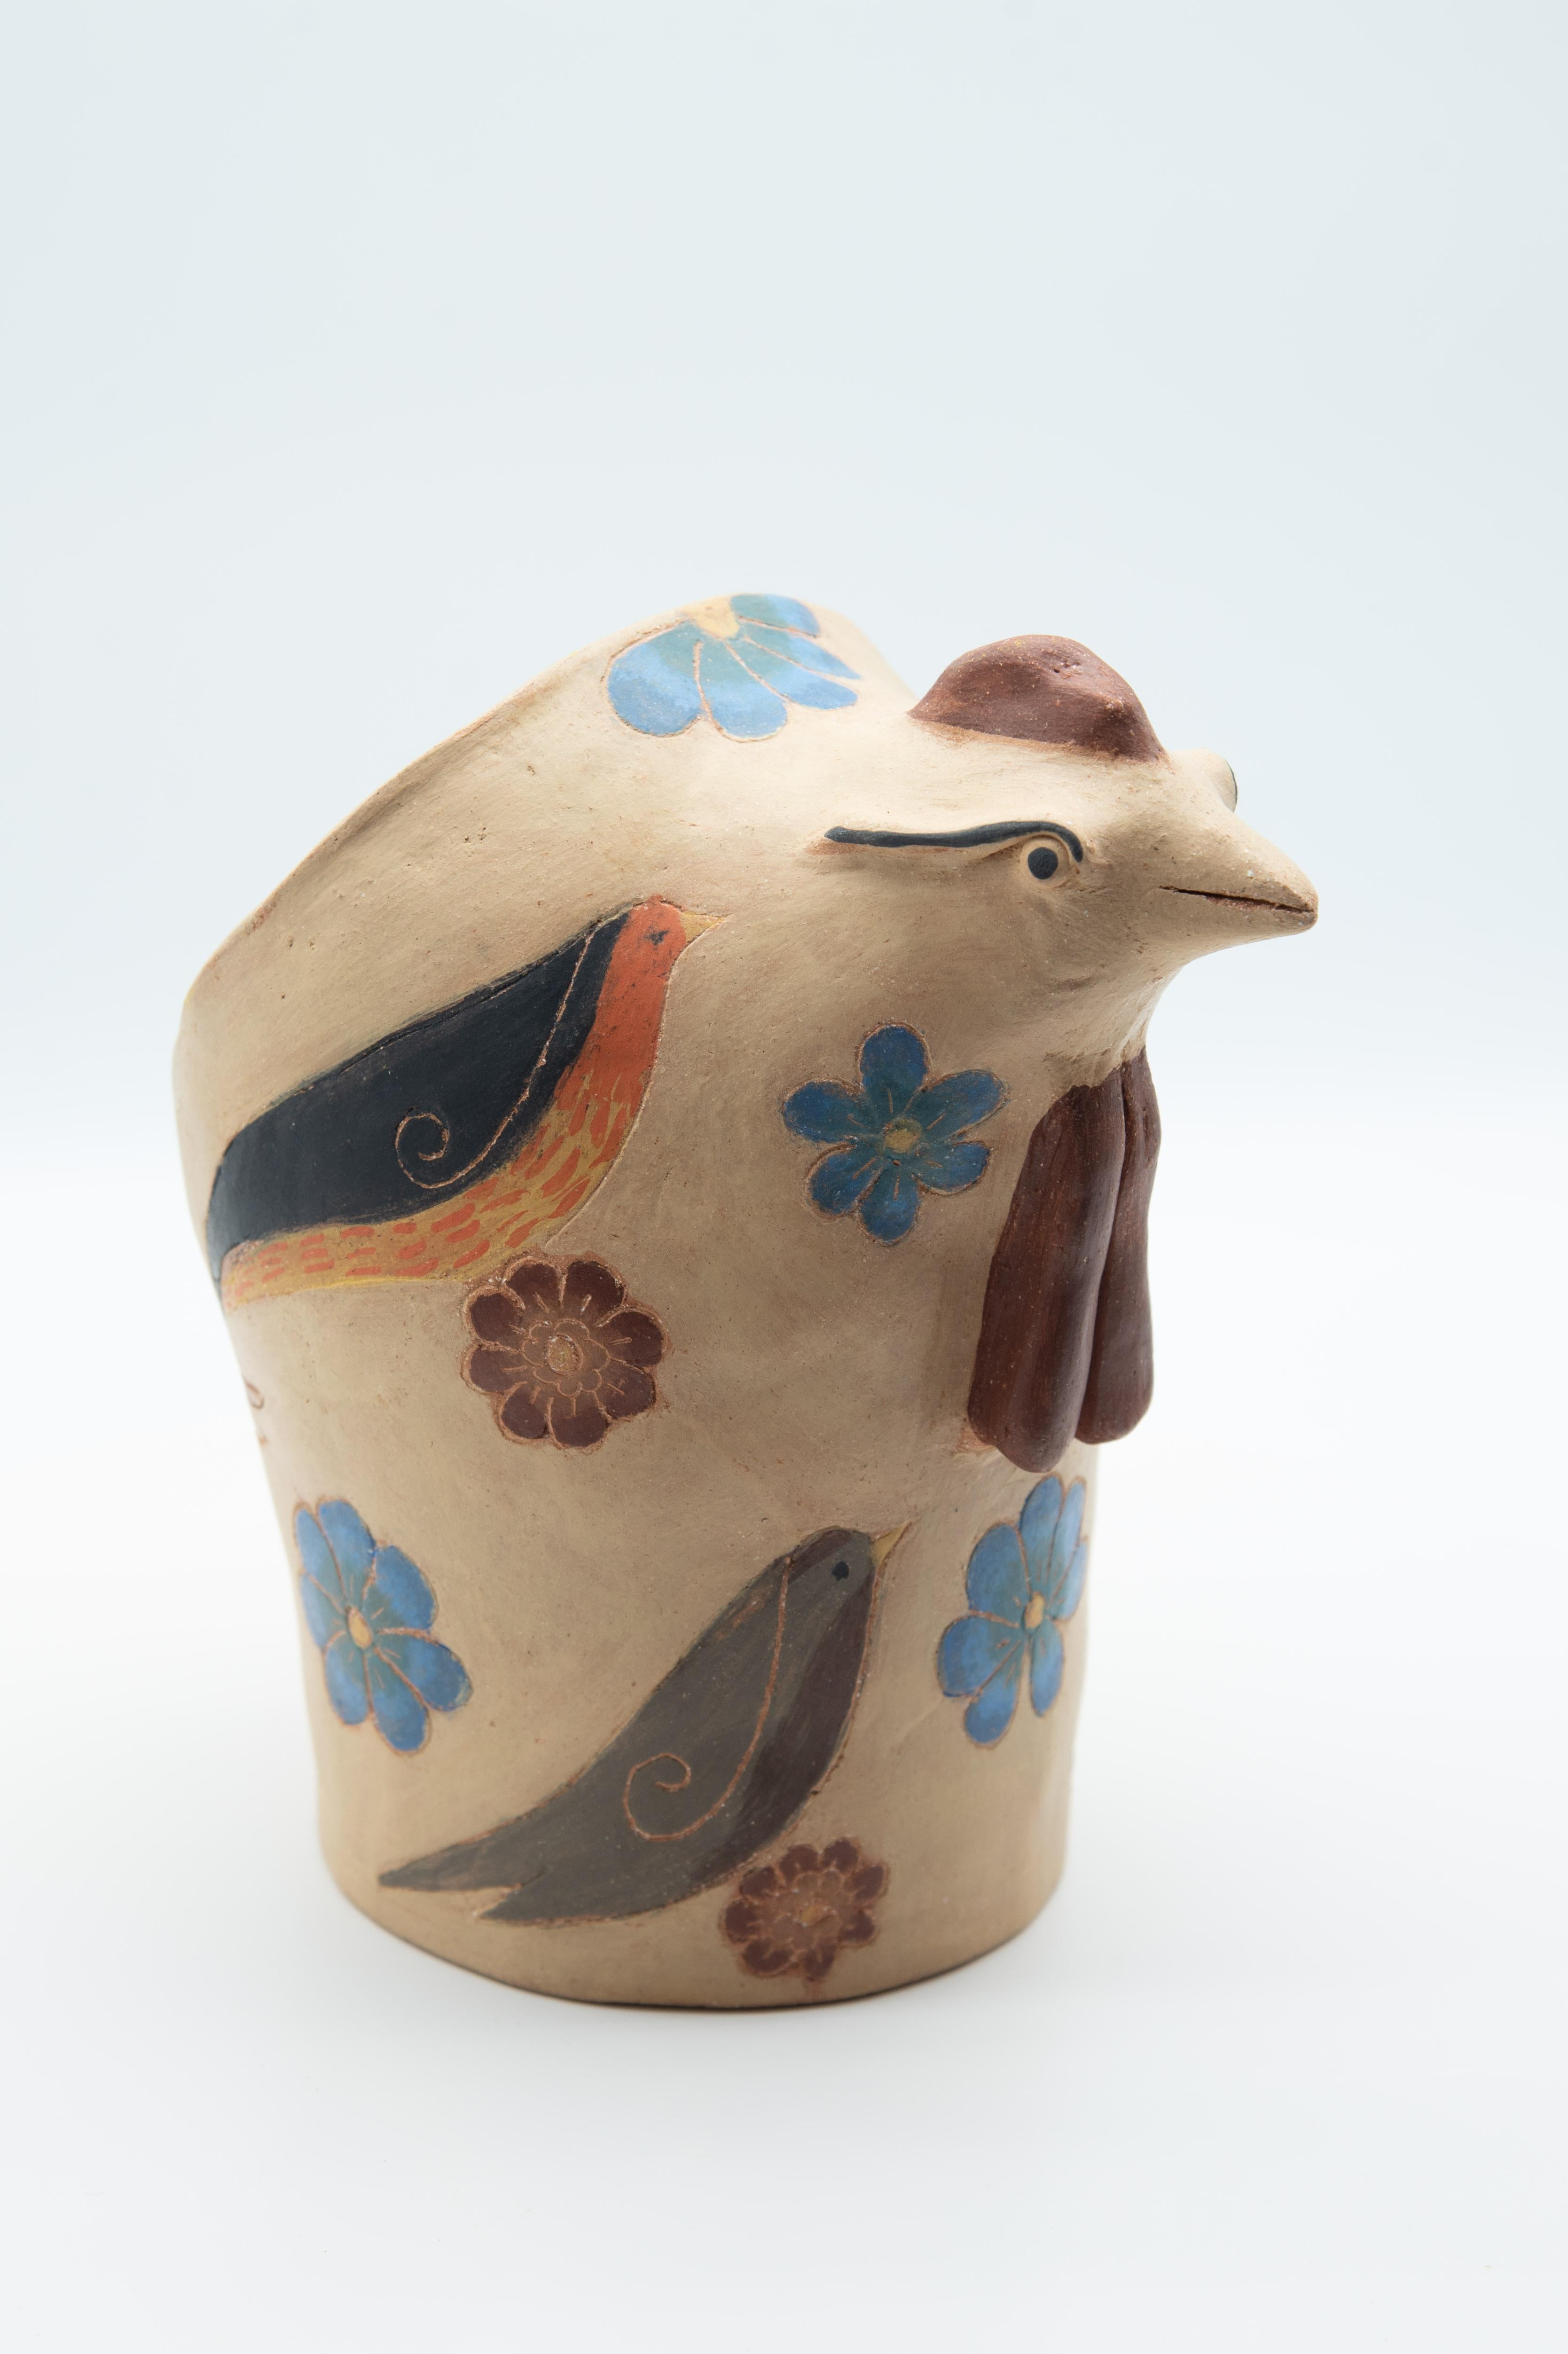 This Mexican ceramic hen is an egg basket, perfect to keep eggs fresh -- a utilitarian kitchen piece by artist Manuel Reyes. Made with clay from Oaxaca and Zacatecas, painted with oxides from the region. Done with the hand-modeled technique and